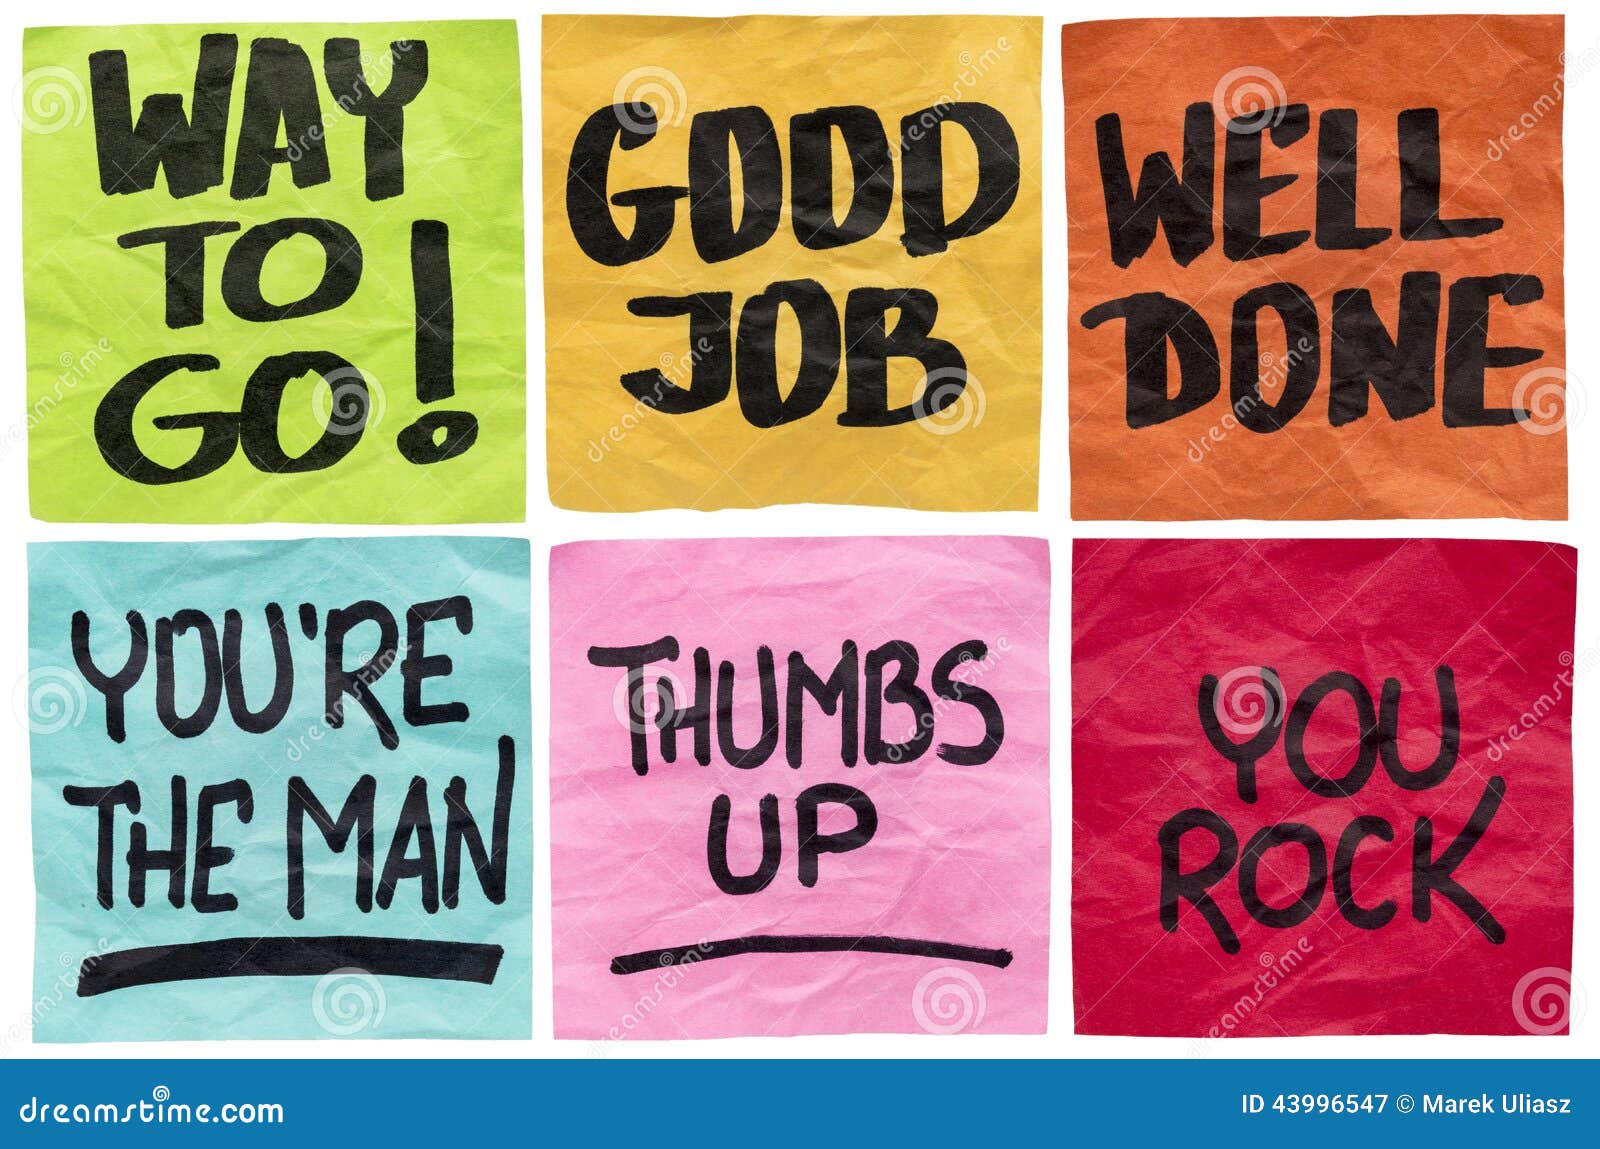 good-job-well-done-way-to-go-you-re-man-thumbs-up-you-rock-set-isolated-sticky-notes-positive-affirmation-words-43996547.jpg